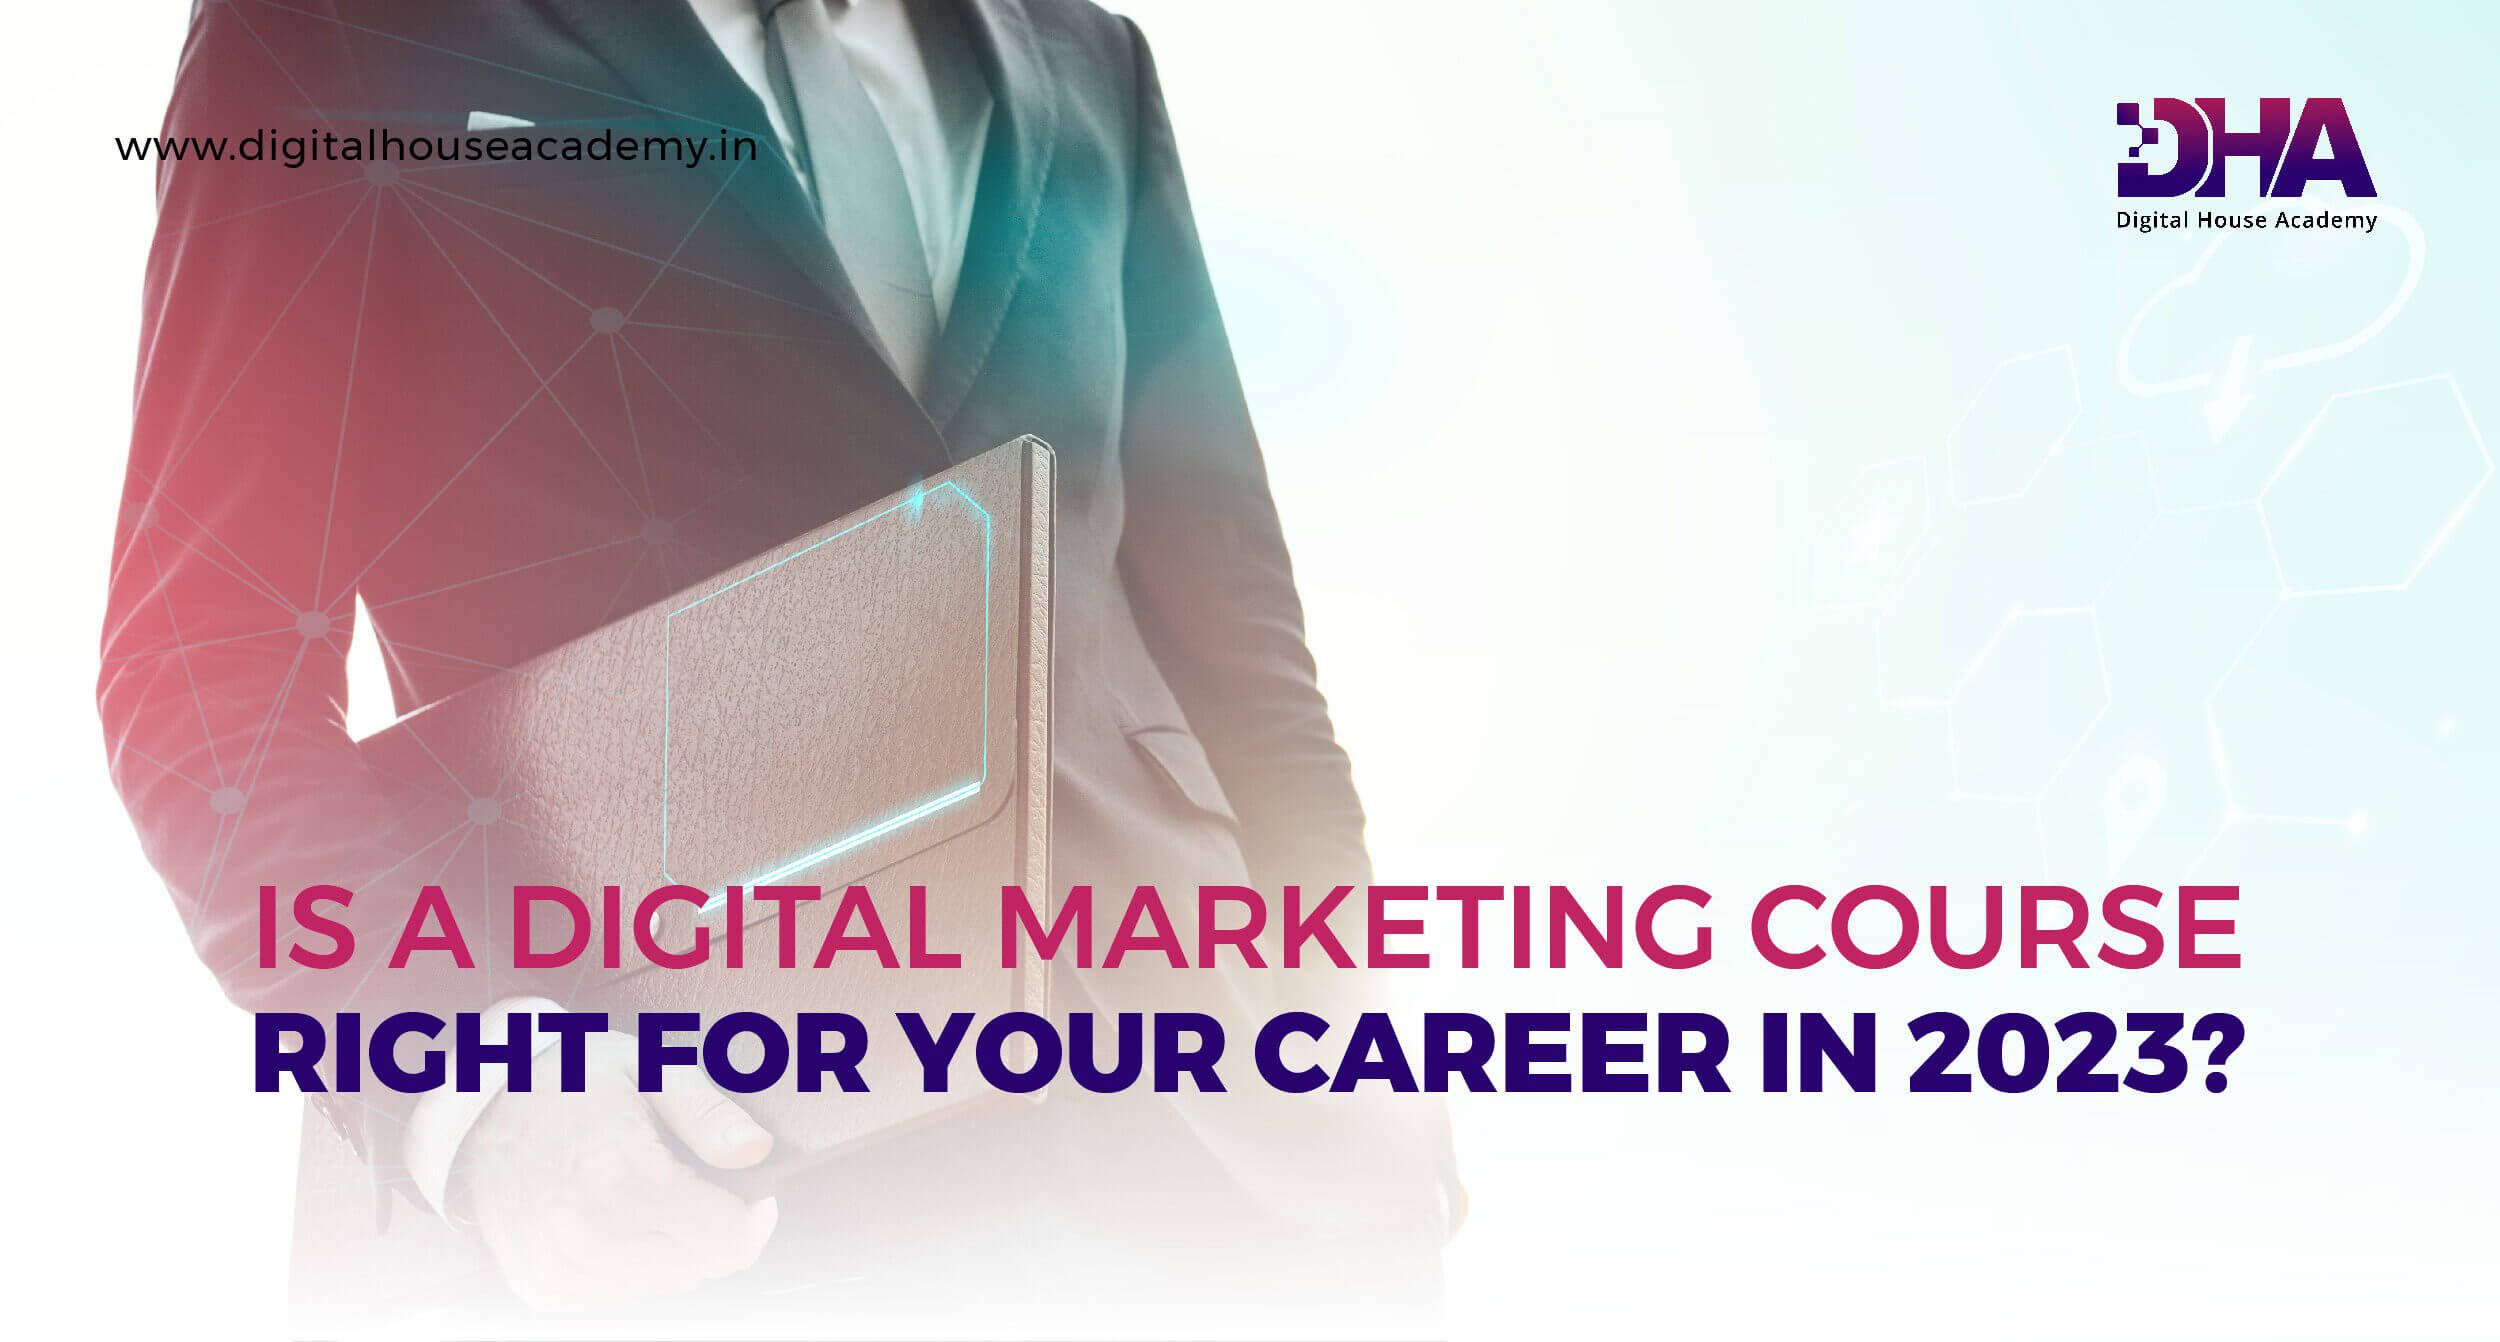 Digital Marketing Course Right for Your Career in 2023?